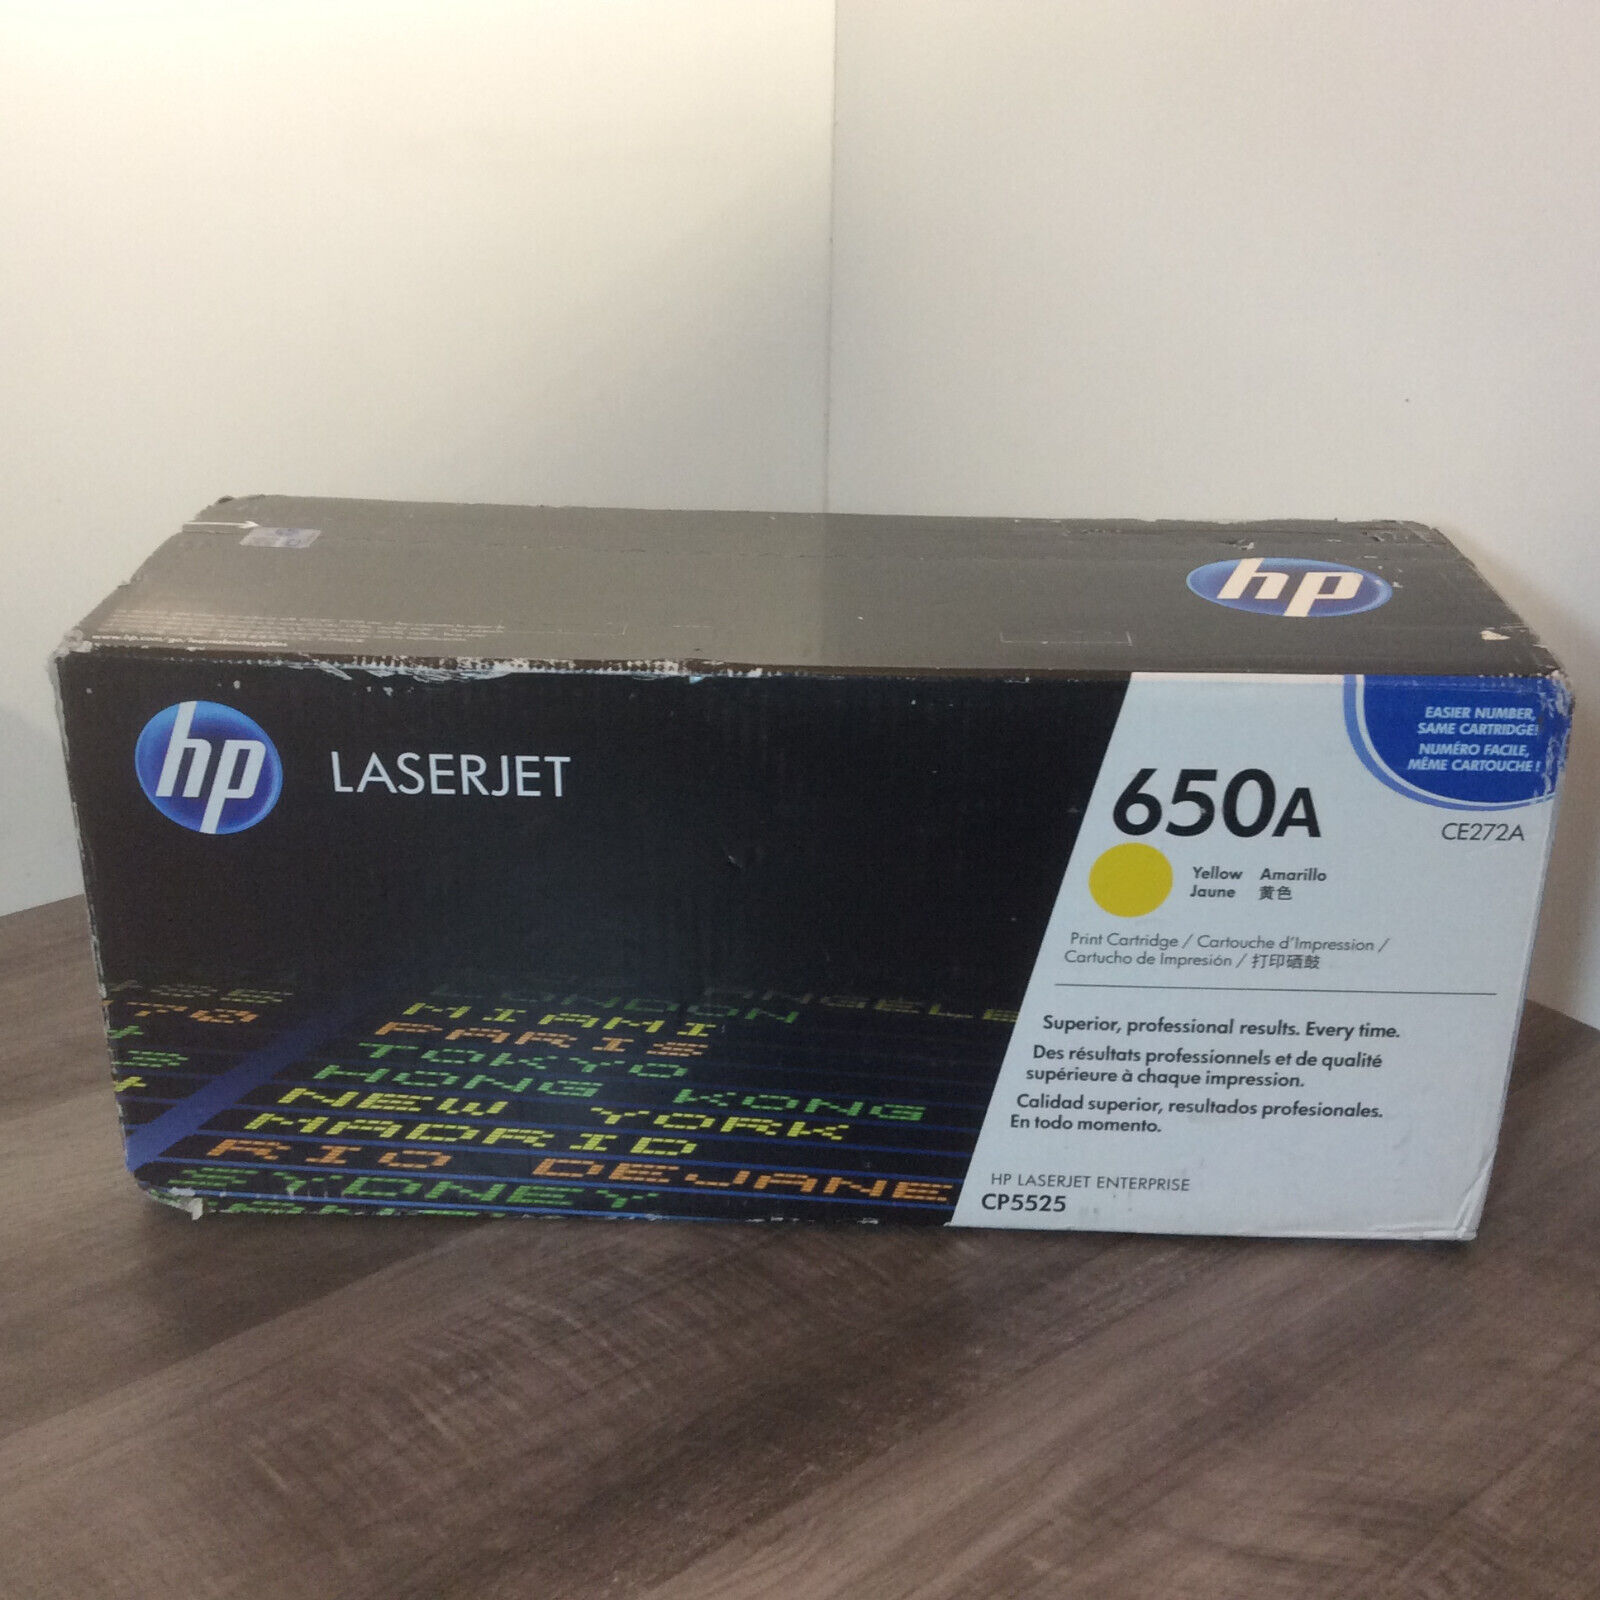 Genuine HP 650A CE272A Yellow Toner Cartridge CP5525 NEW OEM - SEALED BOX